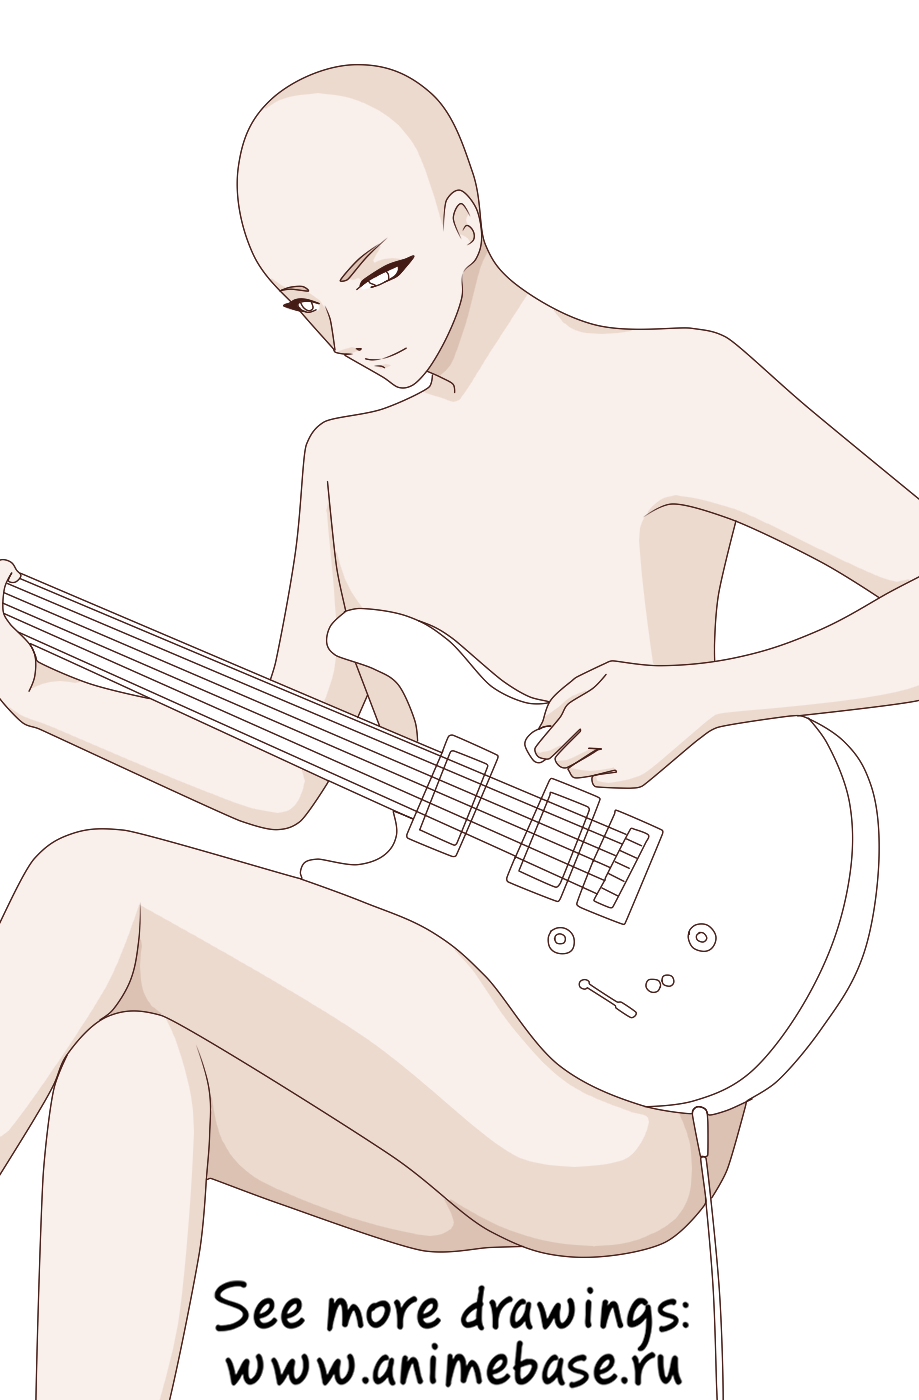 Anime Girl With Guitar Live Wallpaper by Jimking on DeviantArt